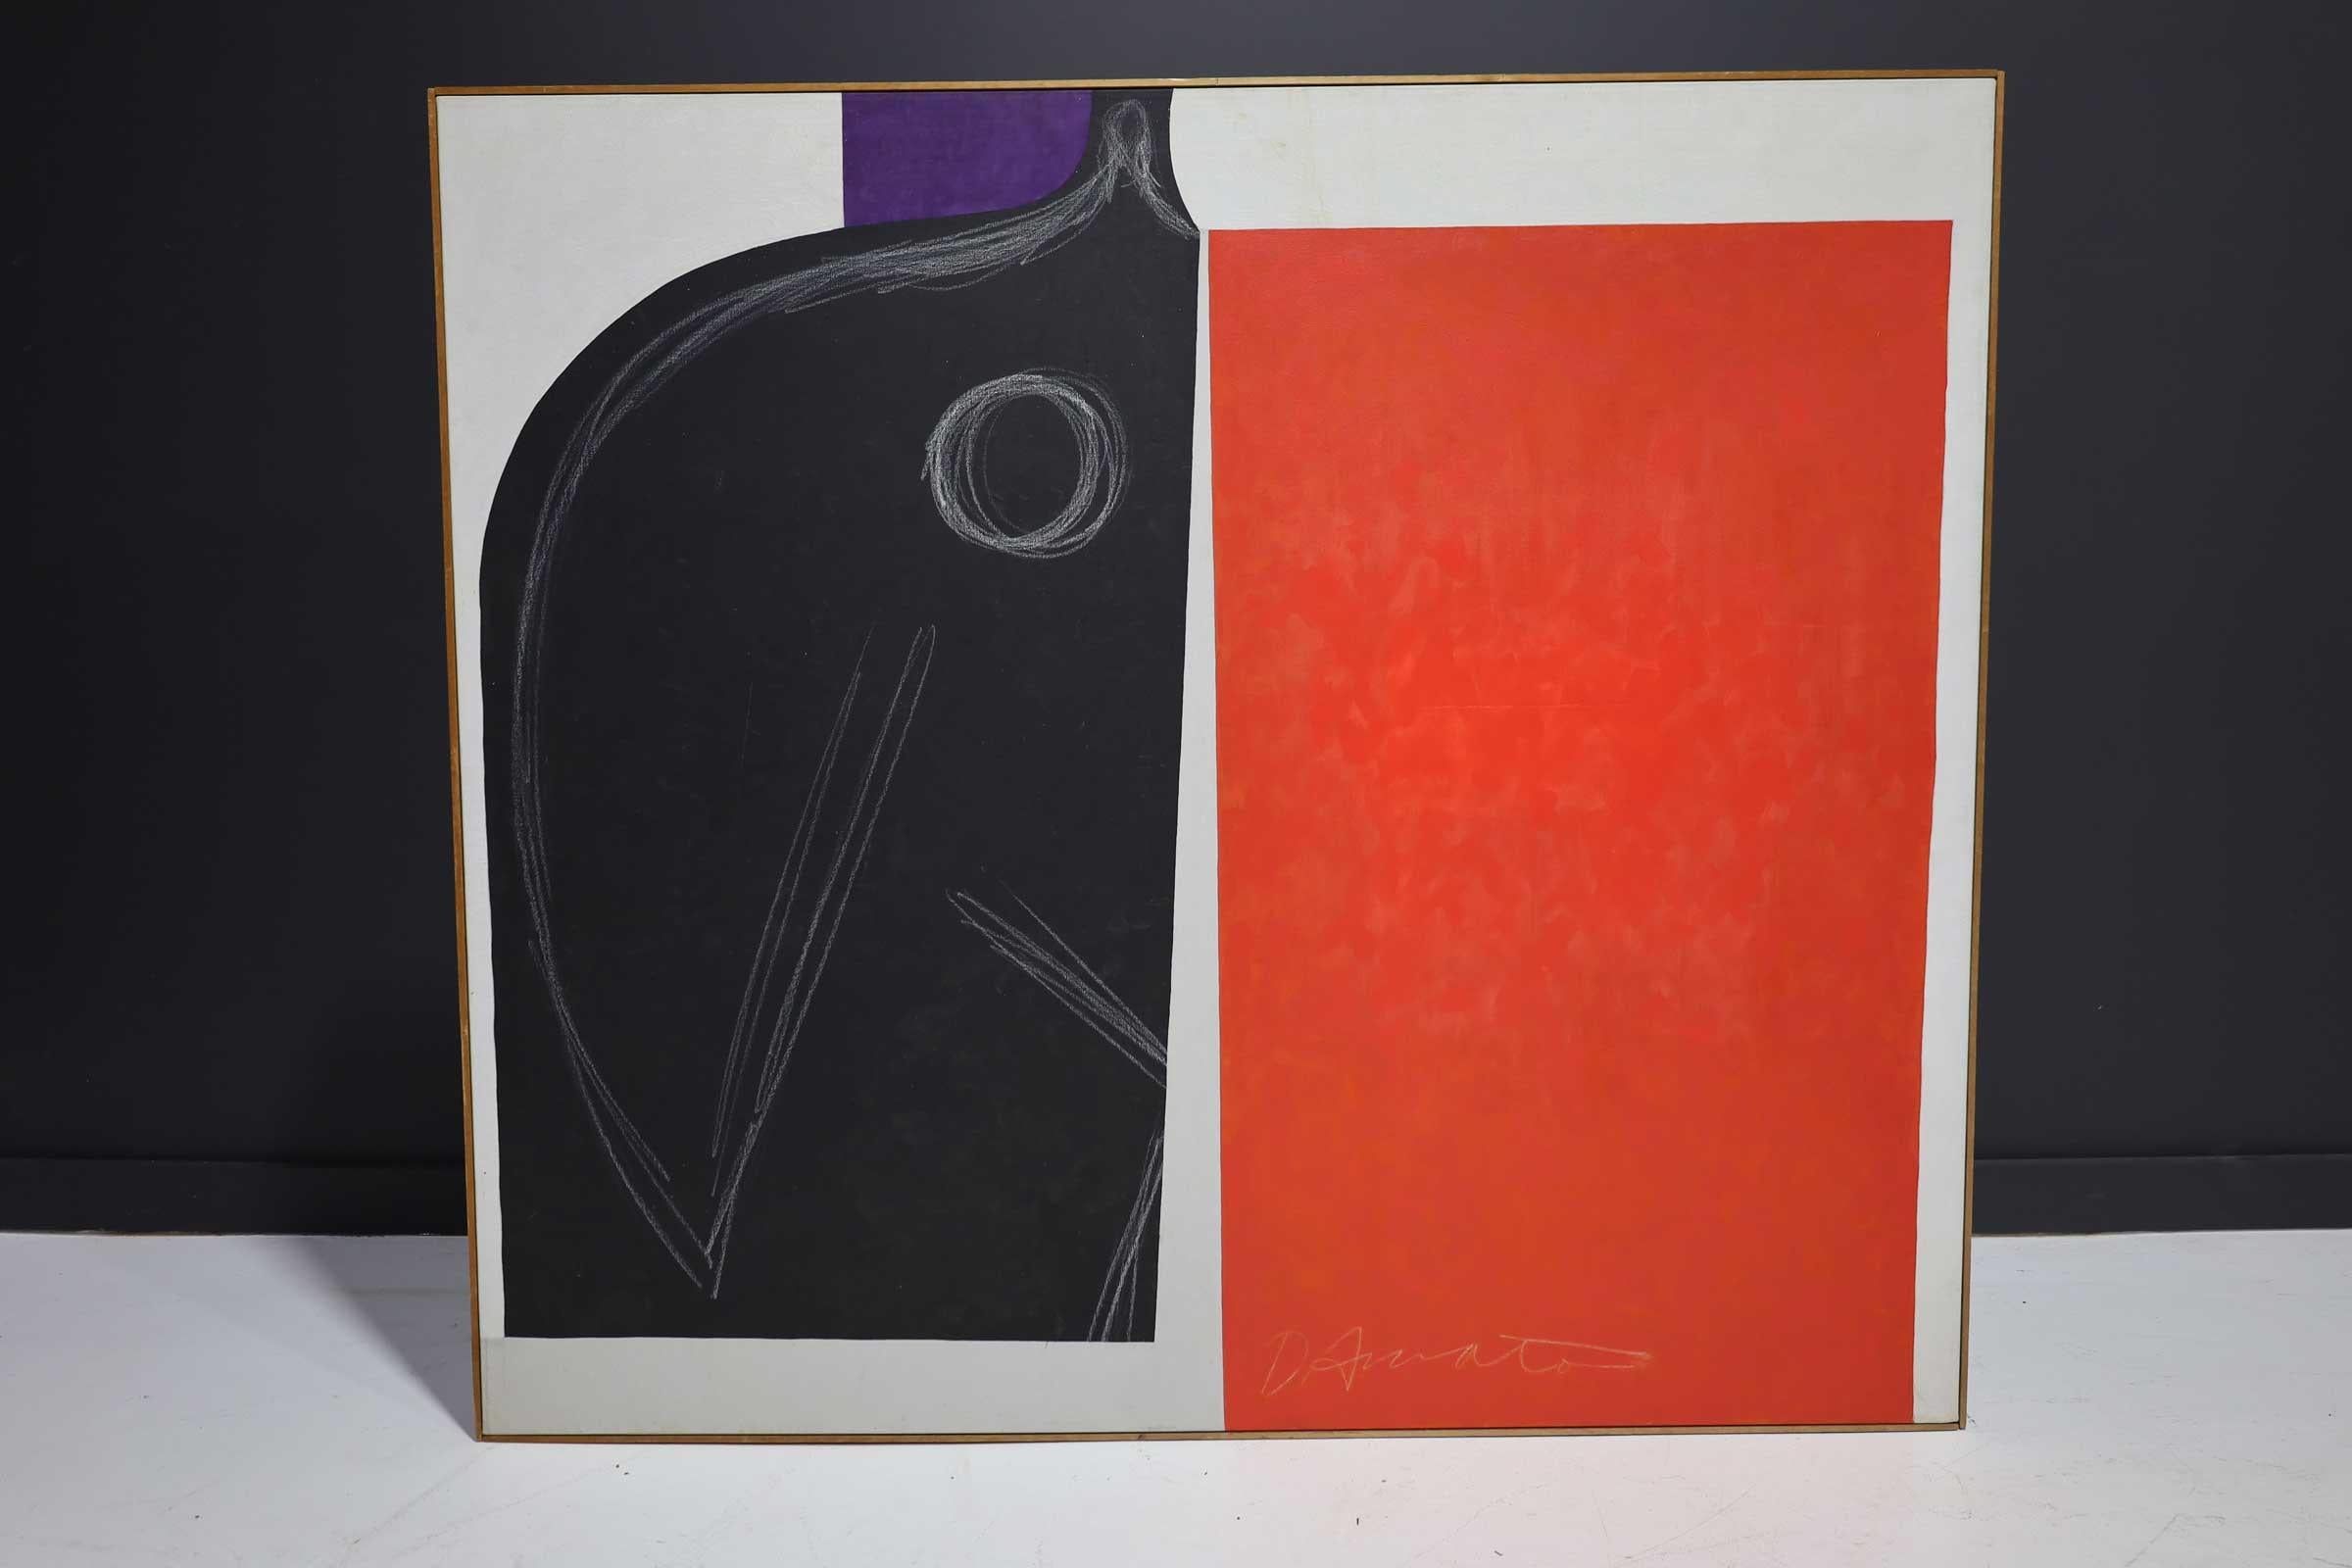 Figural abstract oil on canvas by George D'Amato. George D'Amato was a artist and sculptor who sold his work in the 1980s and 1990s in NYC and the Hamptons. He was an award winning art director who worked on award winning ad campaigns for Alka